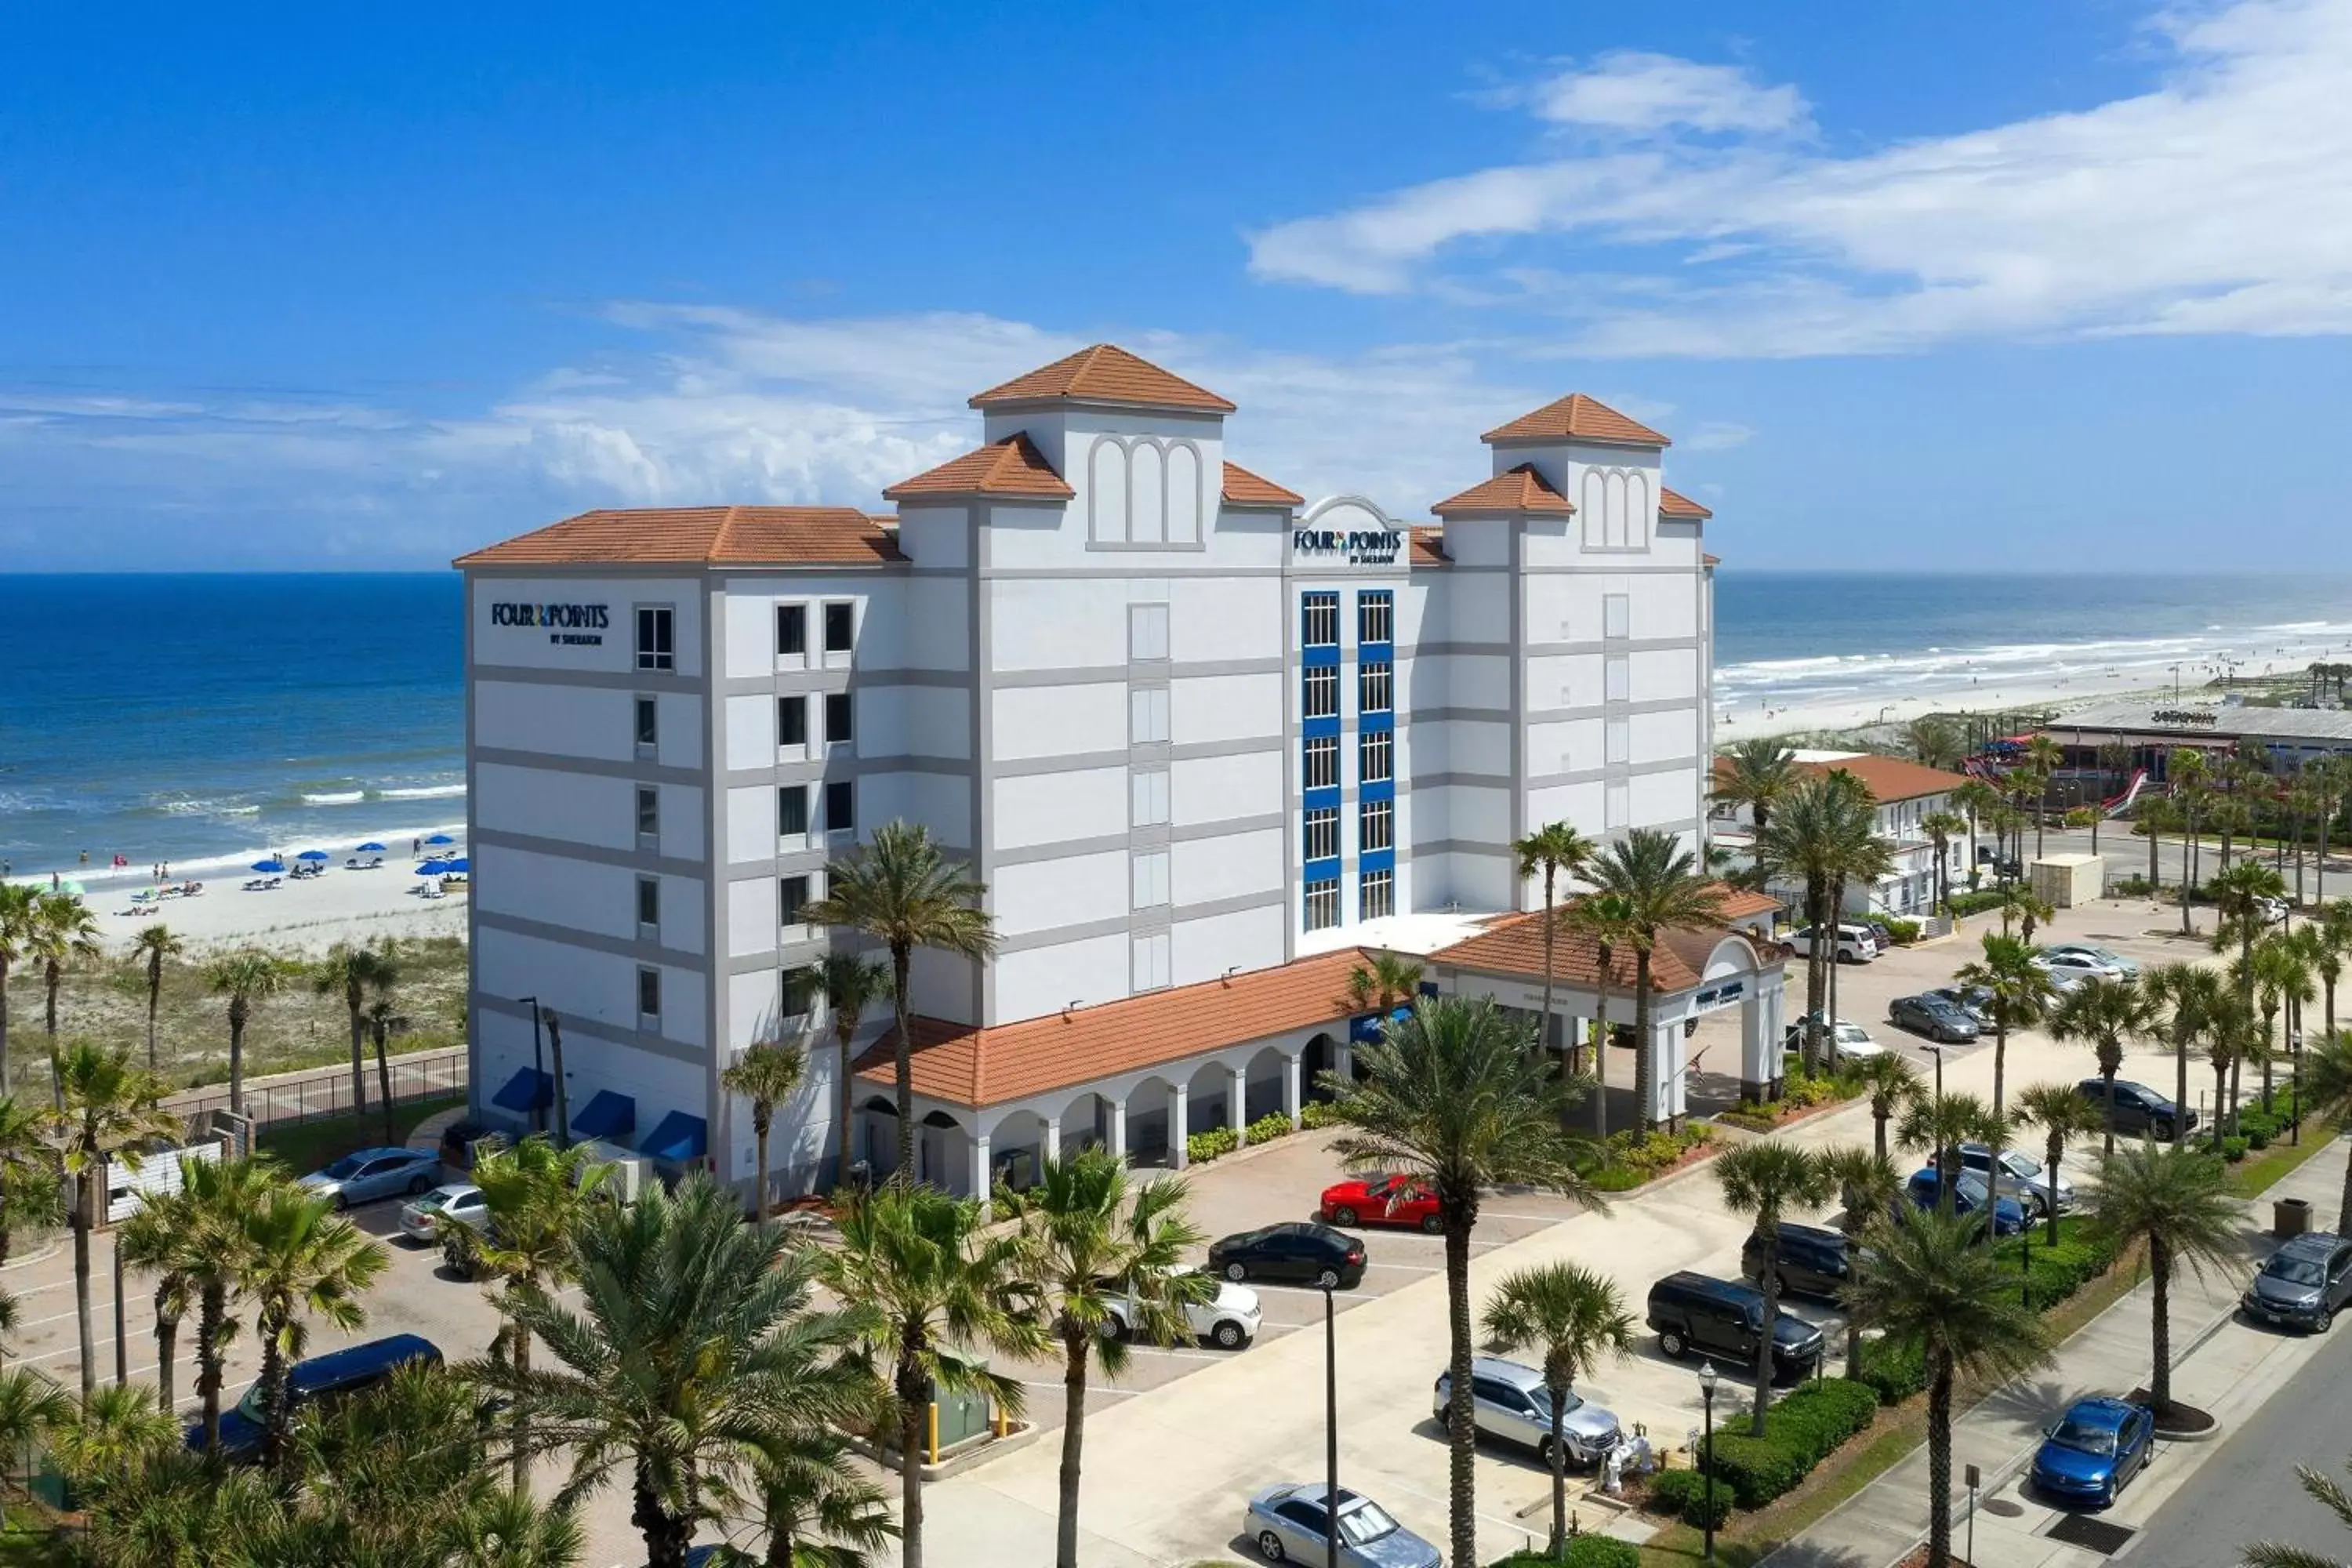 Property building in Four Points by Sheraton Jacksonville Beachfront